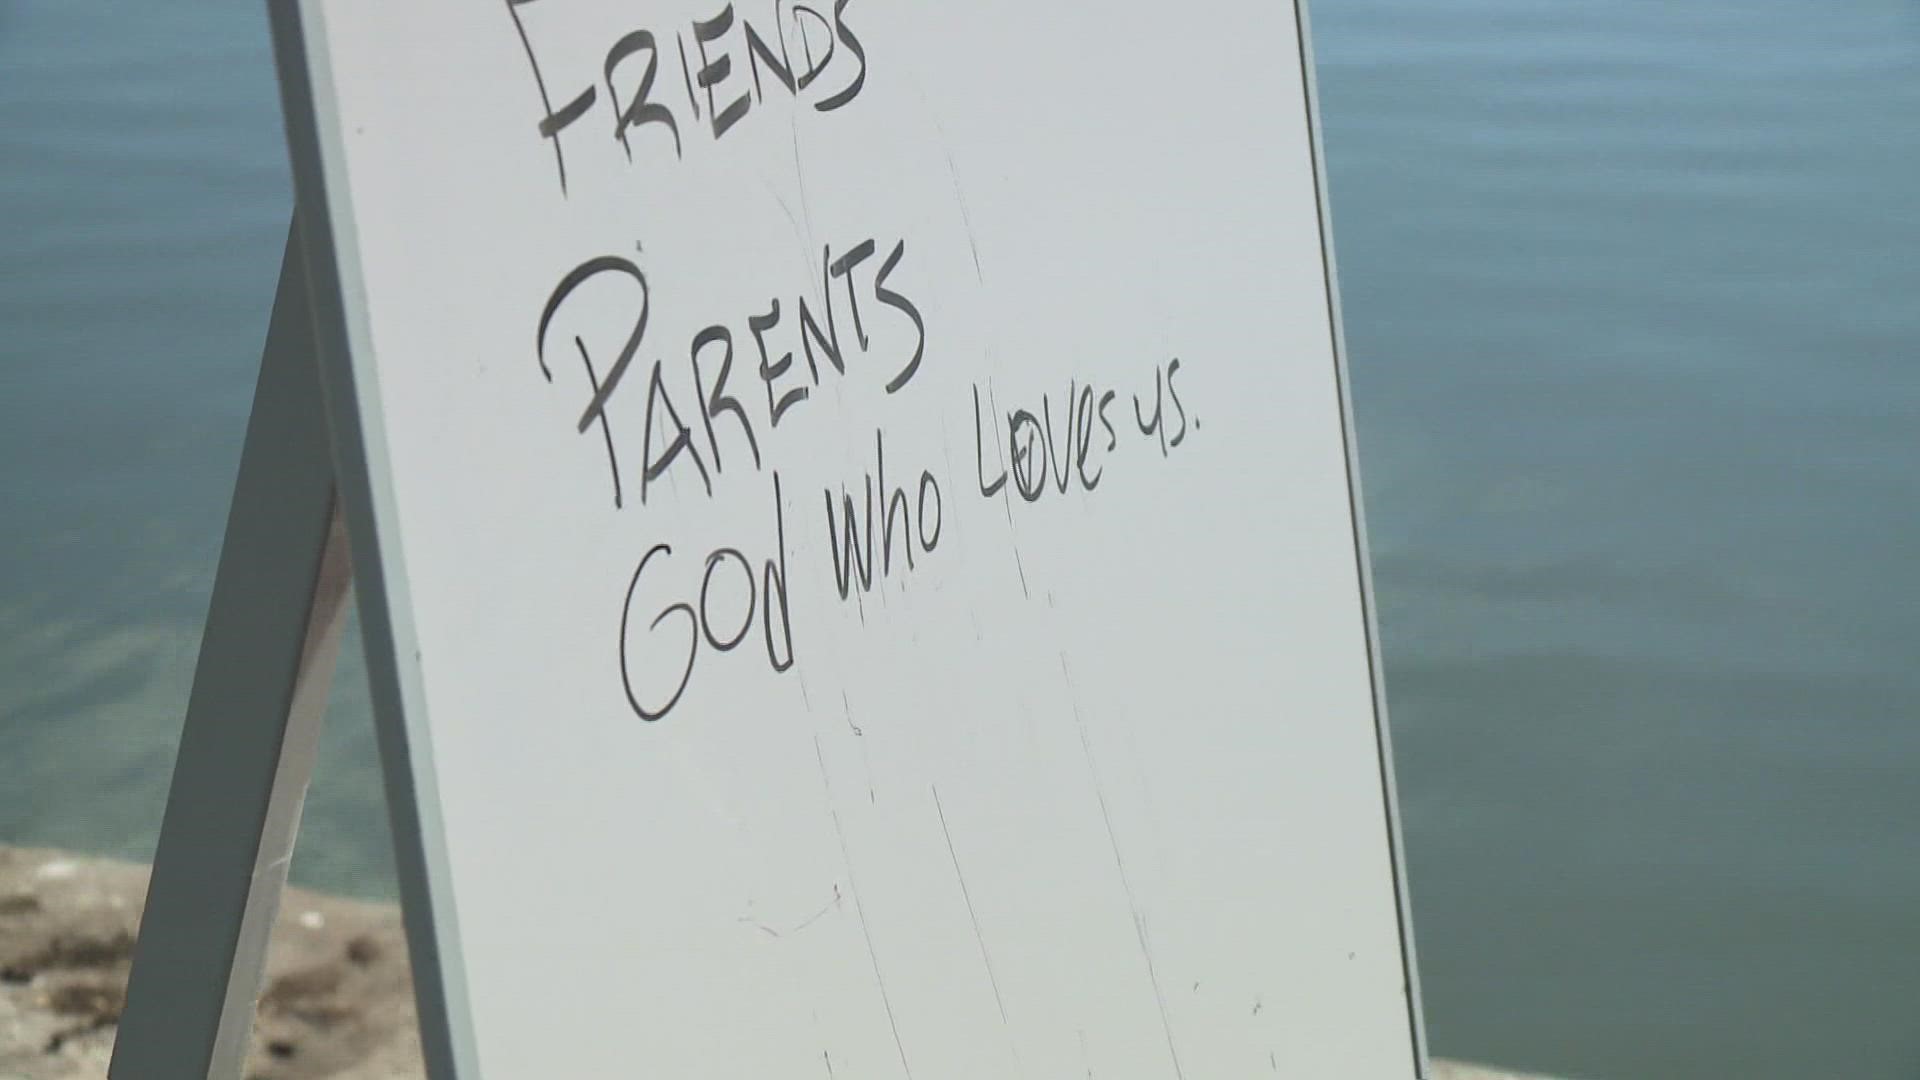 We set up along the lake at Lafreniere Park and asked people to write down what they are giving thanks for, this year.